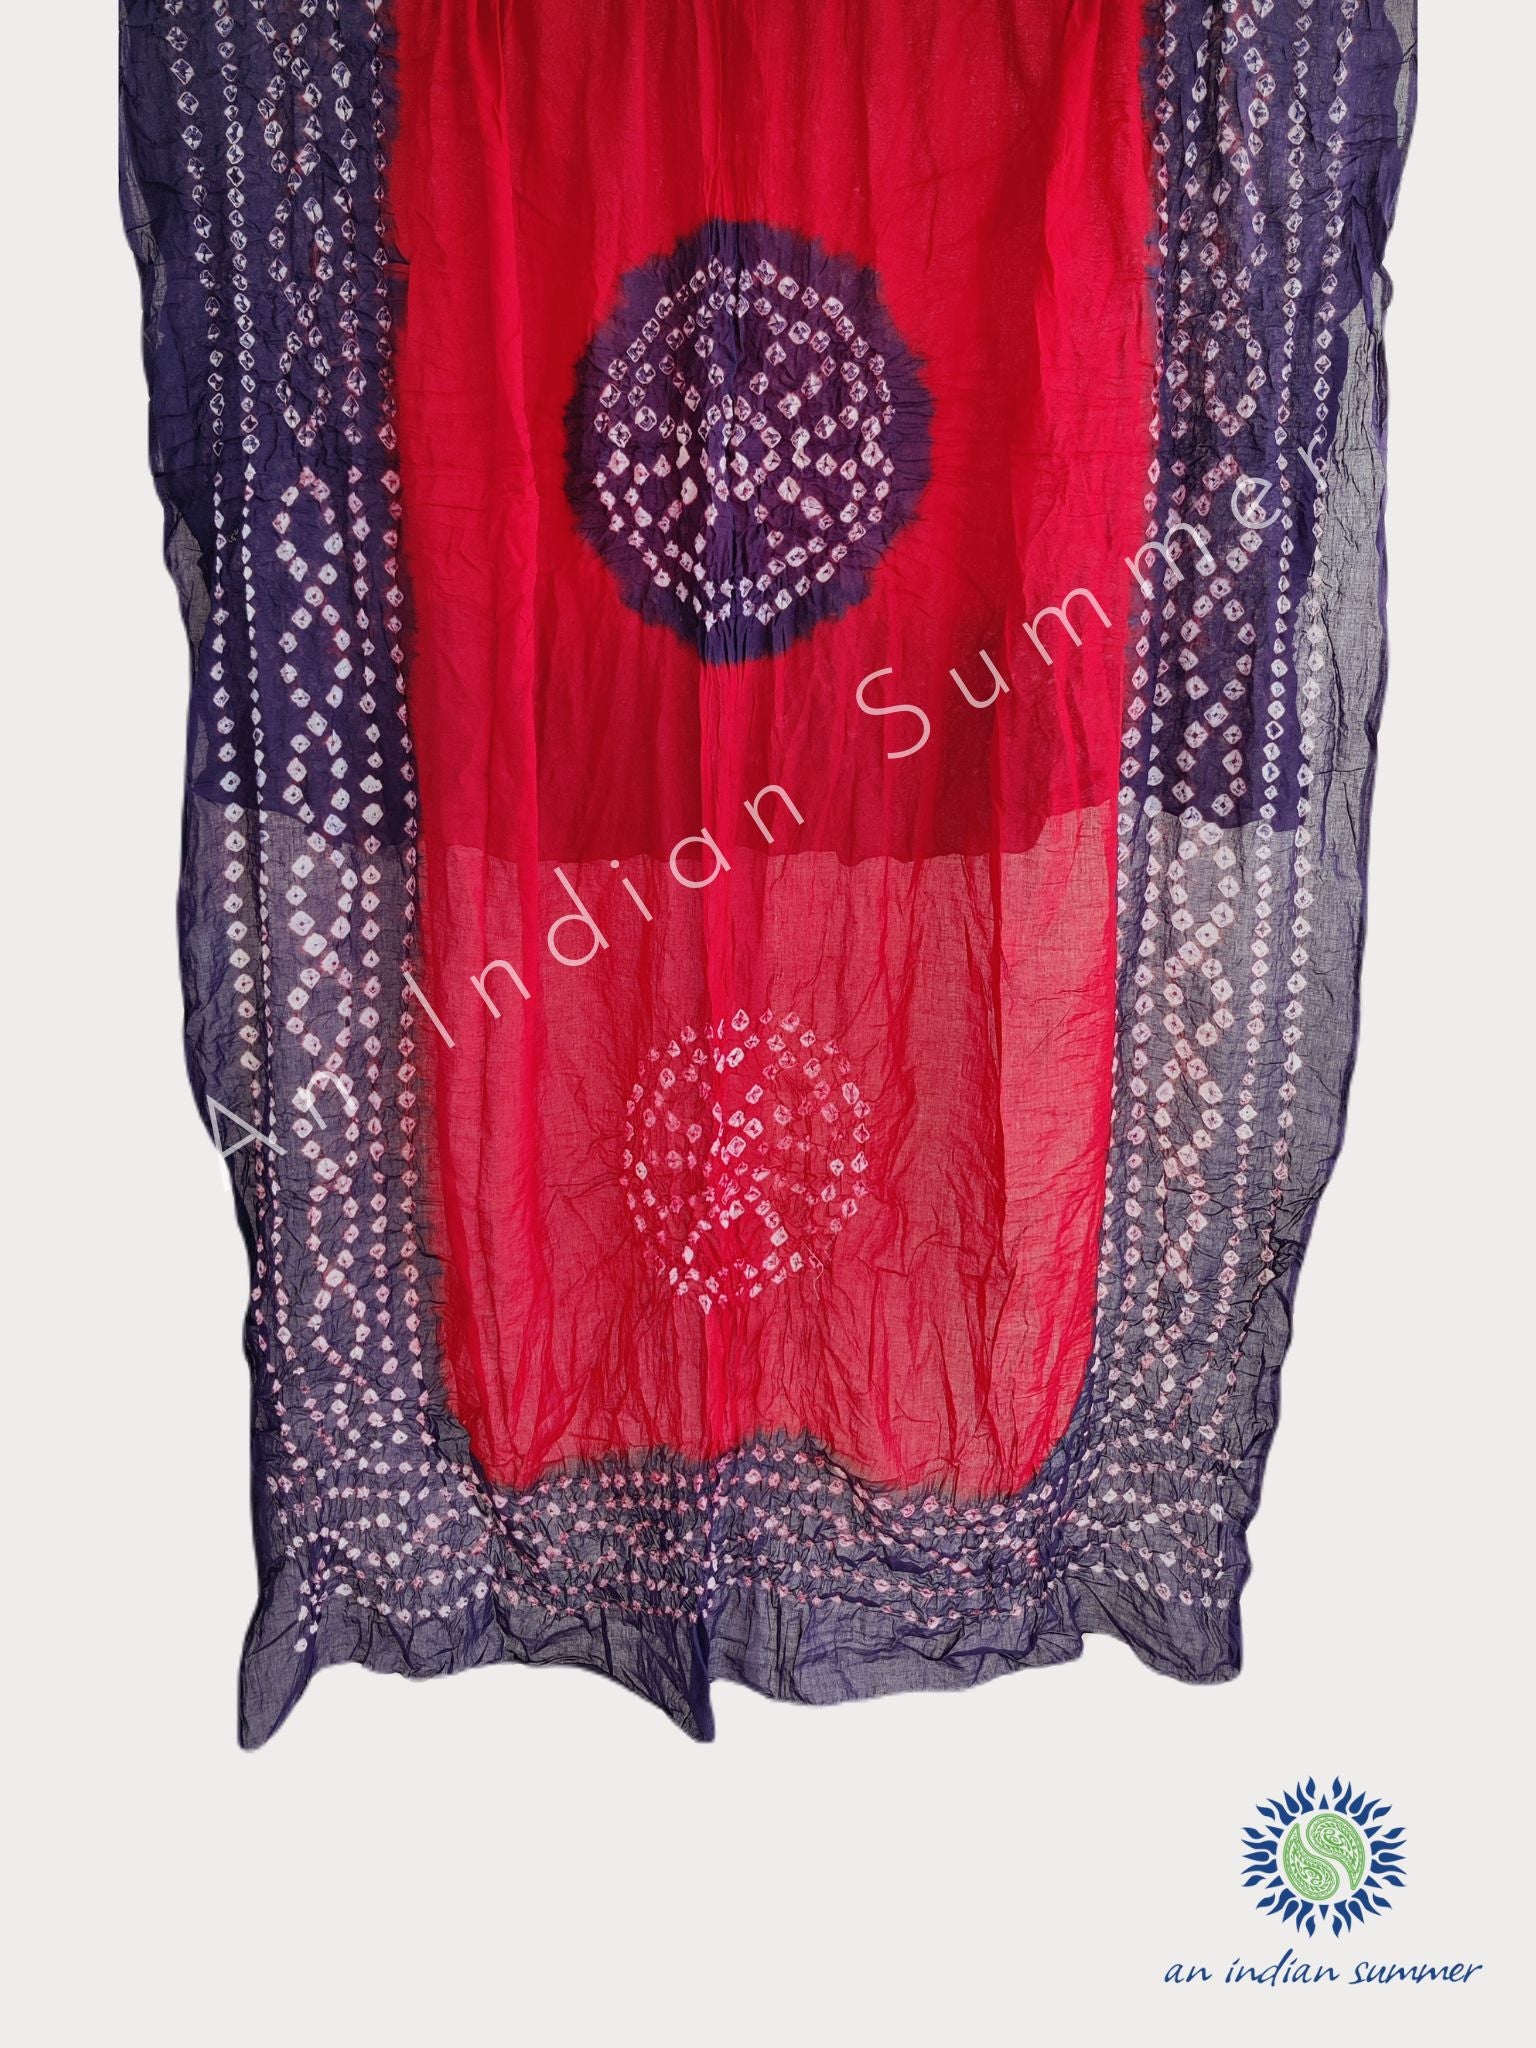 Red & Purple | Contrast Bandhani Sarongs Pareos Shawls | Bandhej Tie Dye | Hand Tie-Dyed | Cotton Voile | An Indian Summer | Seasonless Timeless Sustainable Ethical Authentic Artisan Conscious Clothing Lifestyle Brand